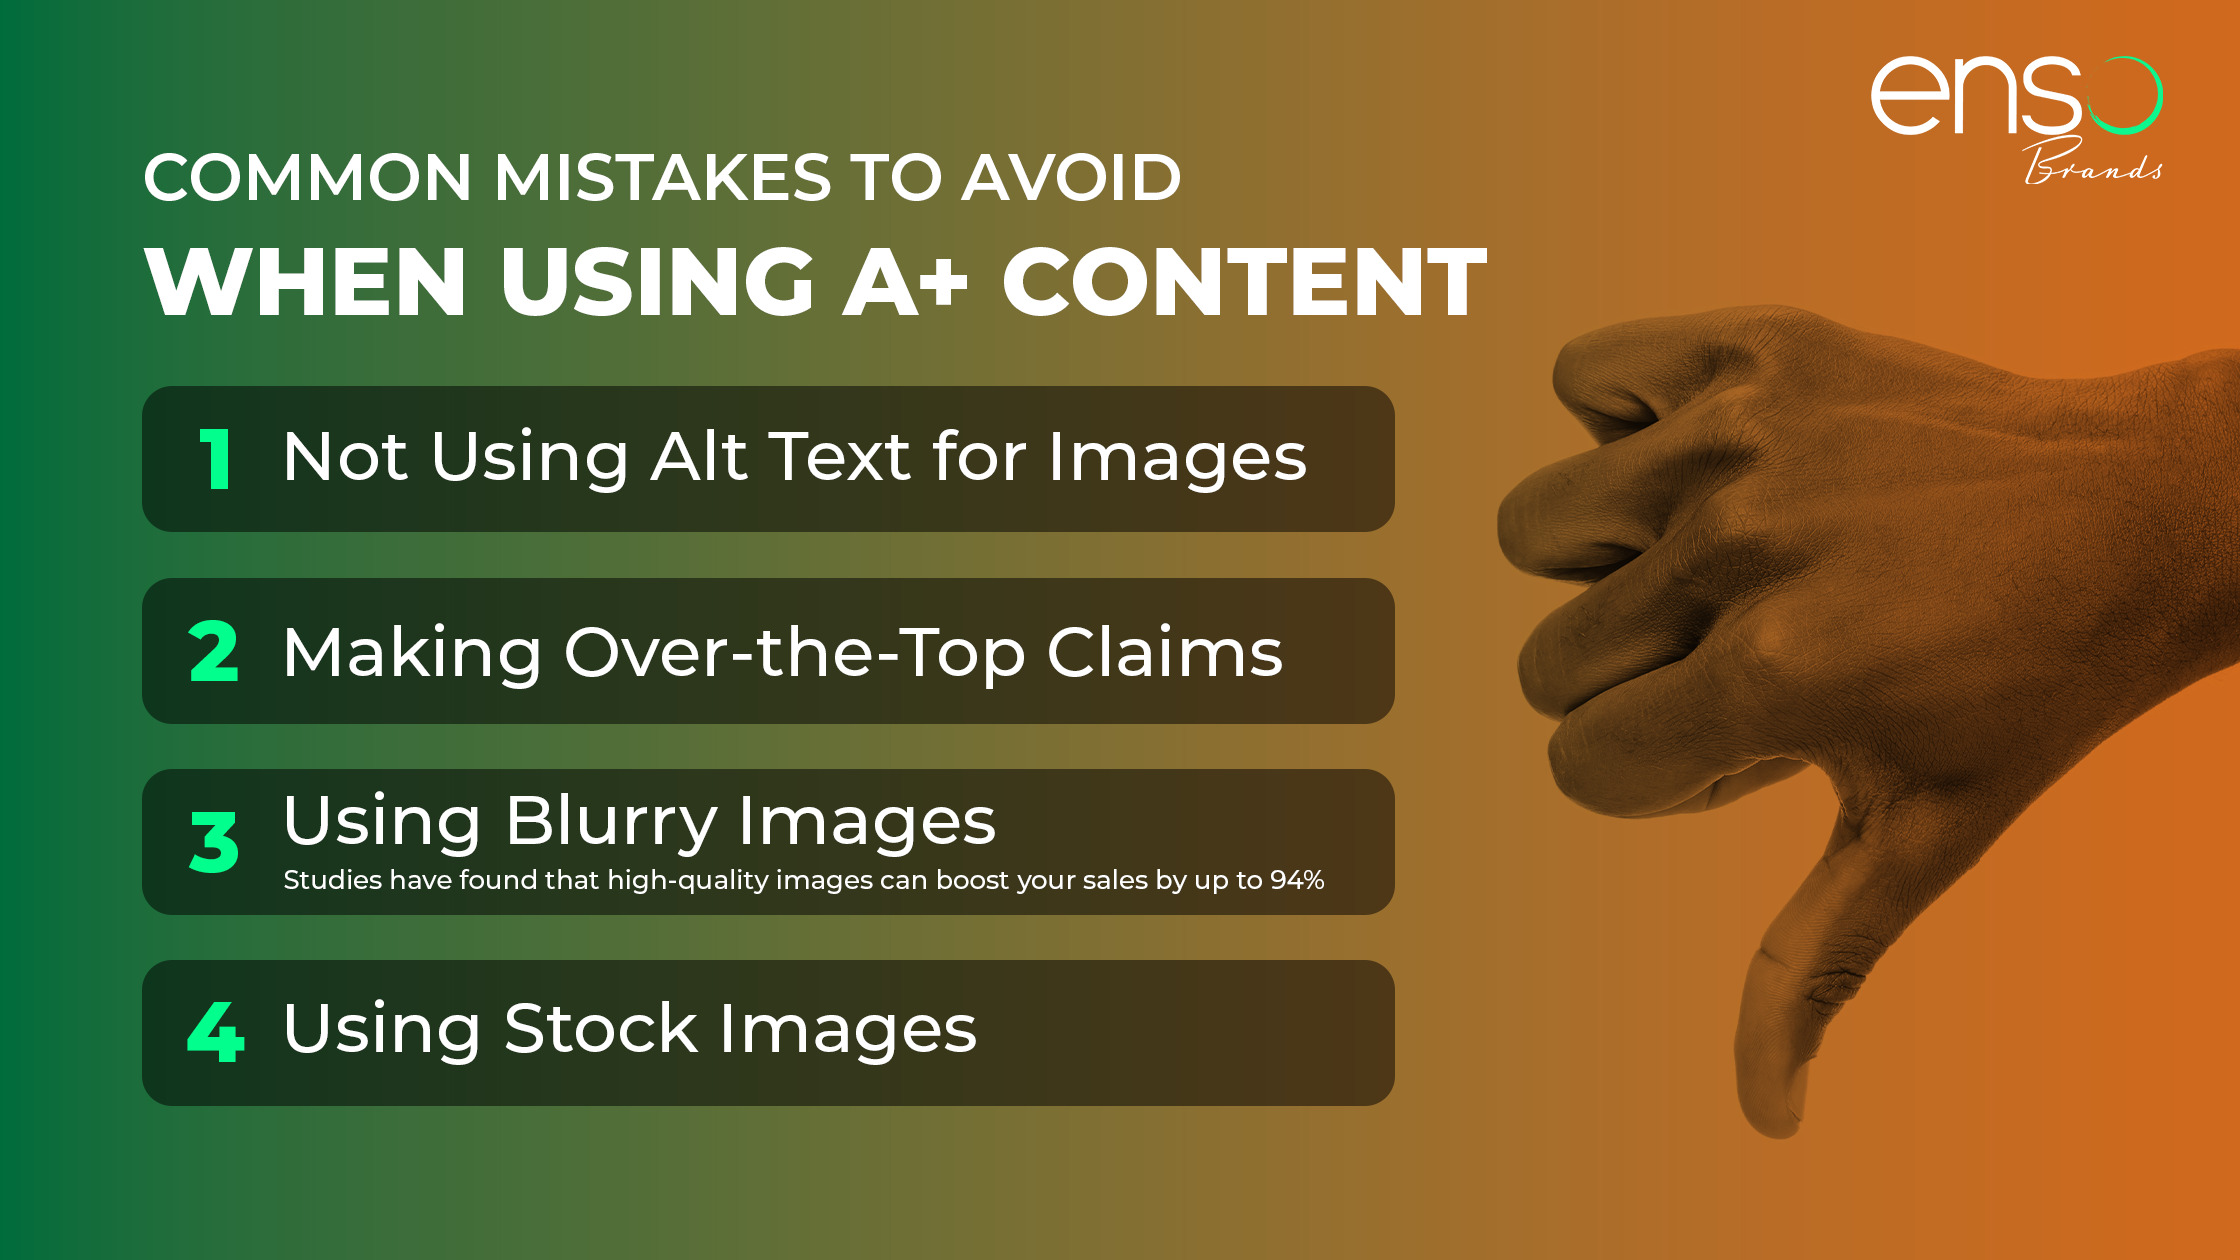 Common mistakes to avoid when using A+ content